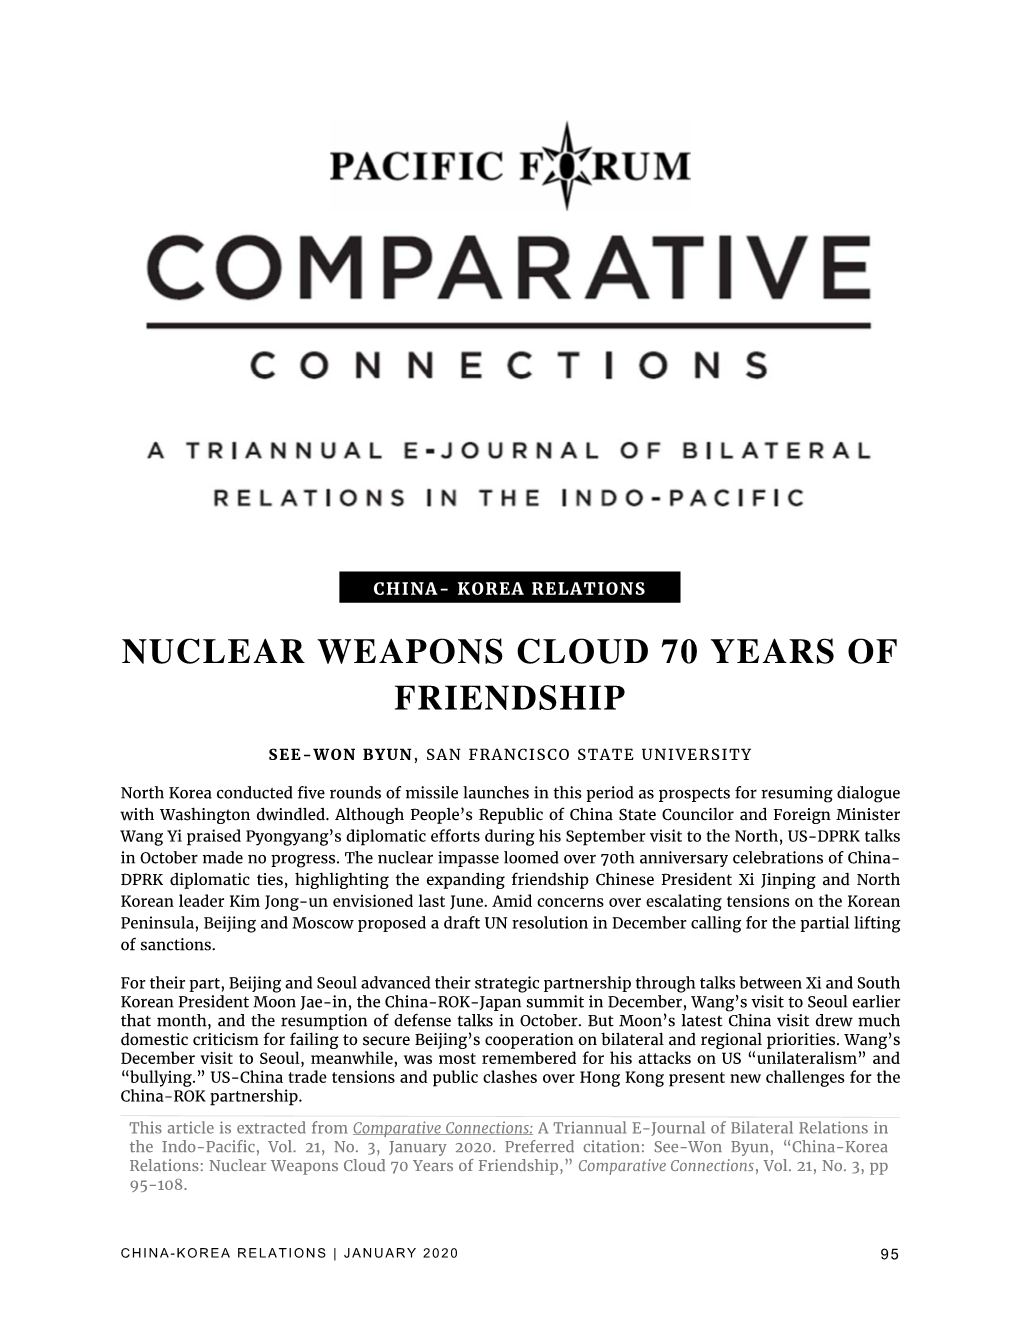 Nuclear Weapons Cloud 70 Years of Friendship